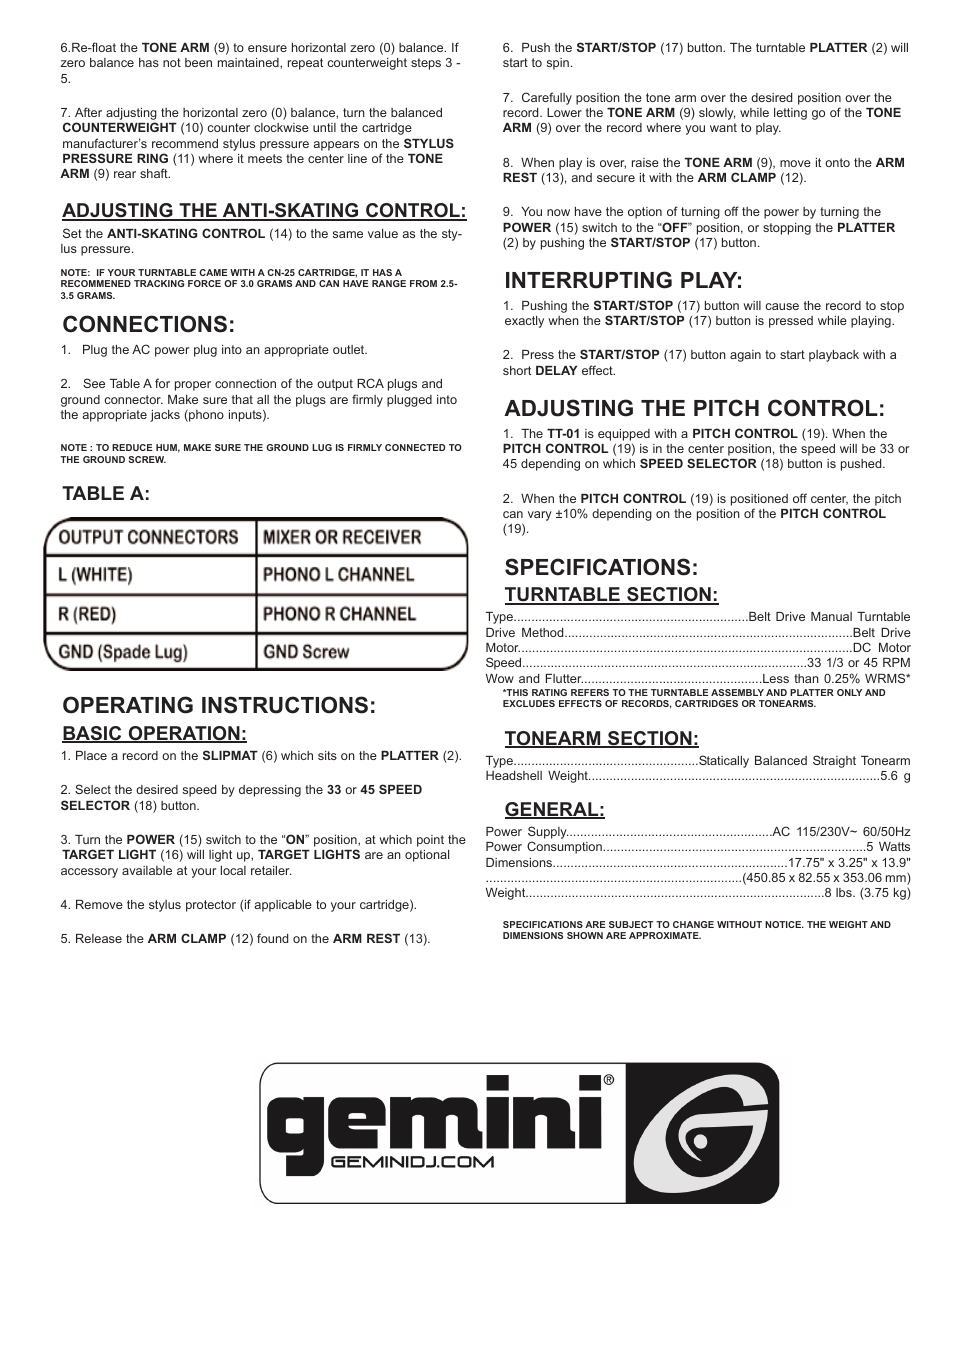 Connections, Operating instructions, Interrupting play | Gemini TT-01